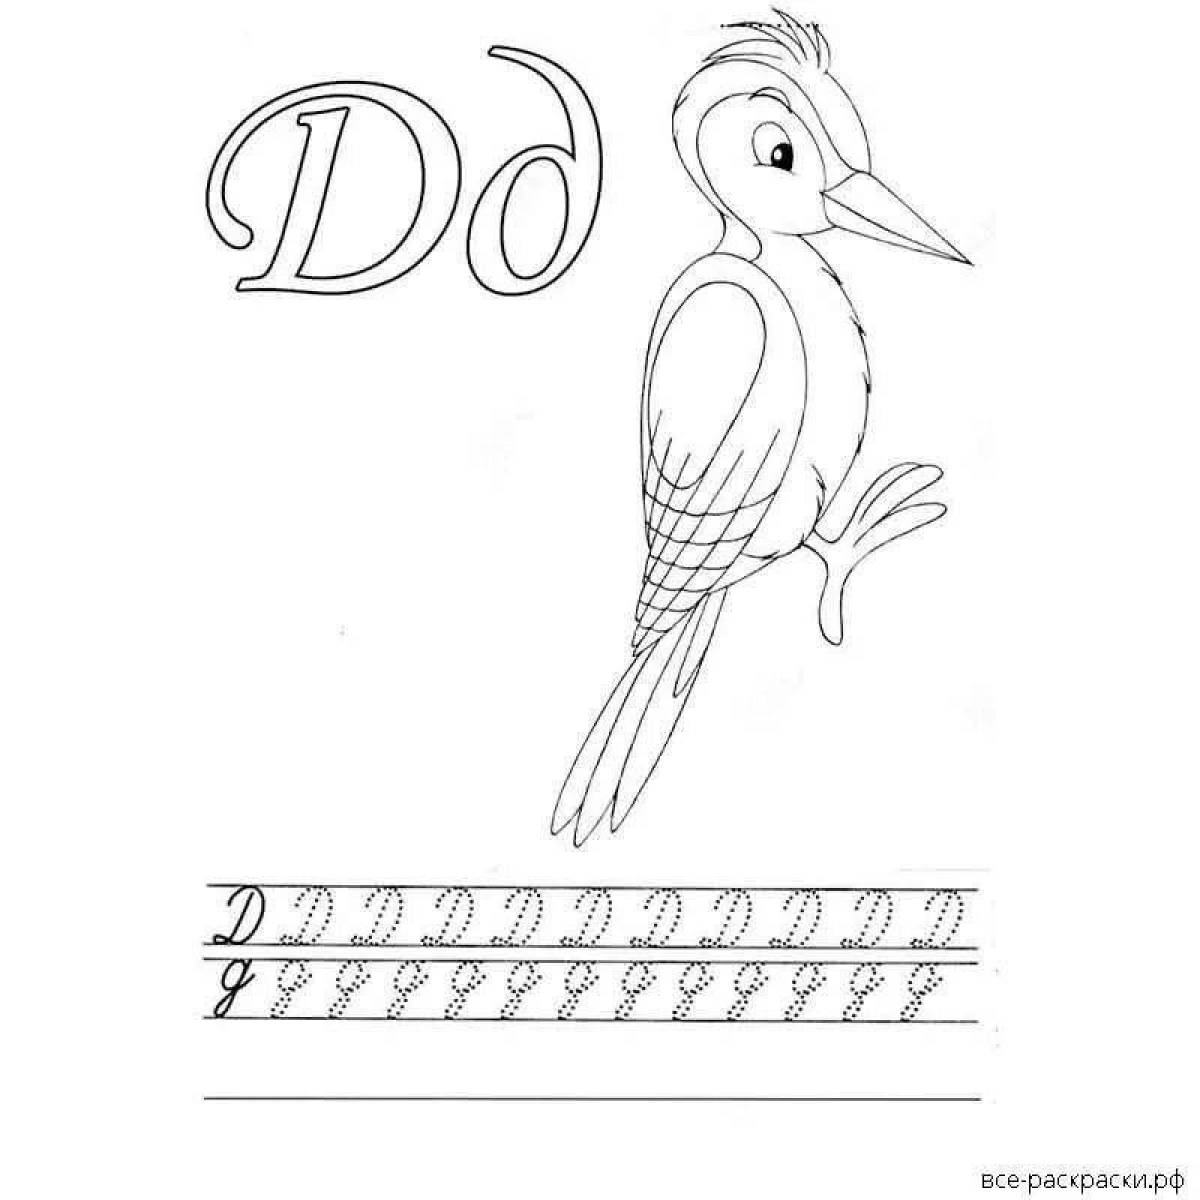 Colorful d coloring page for beginners